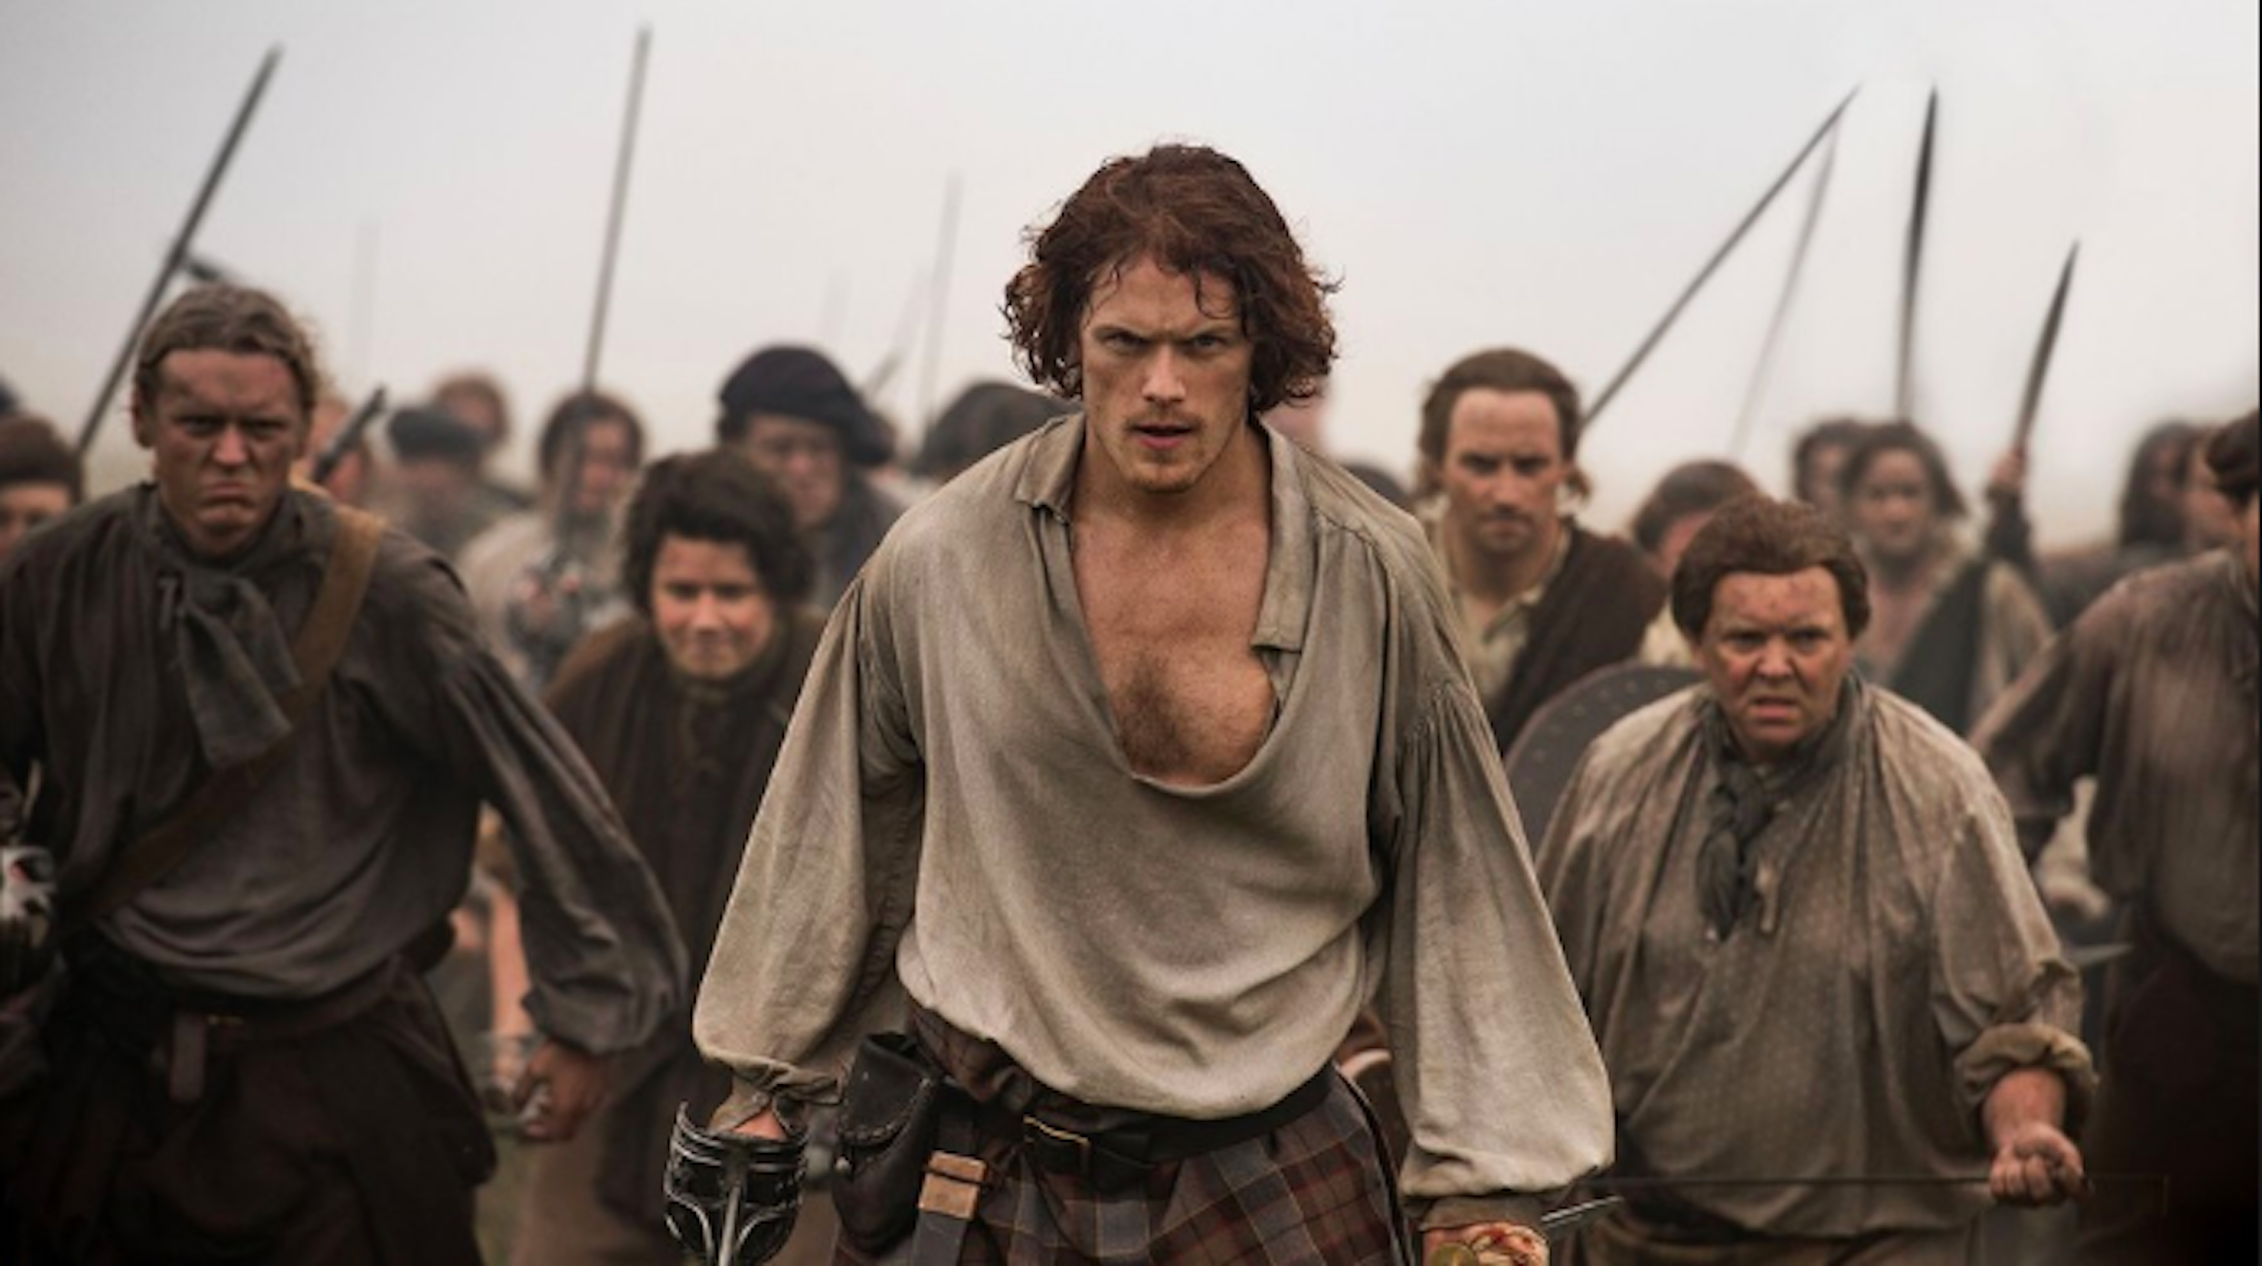 outlander-is-boosting-a-renaissance-of-the-scots-language-here-s-how